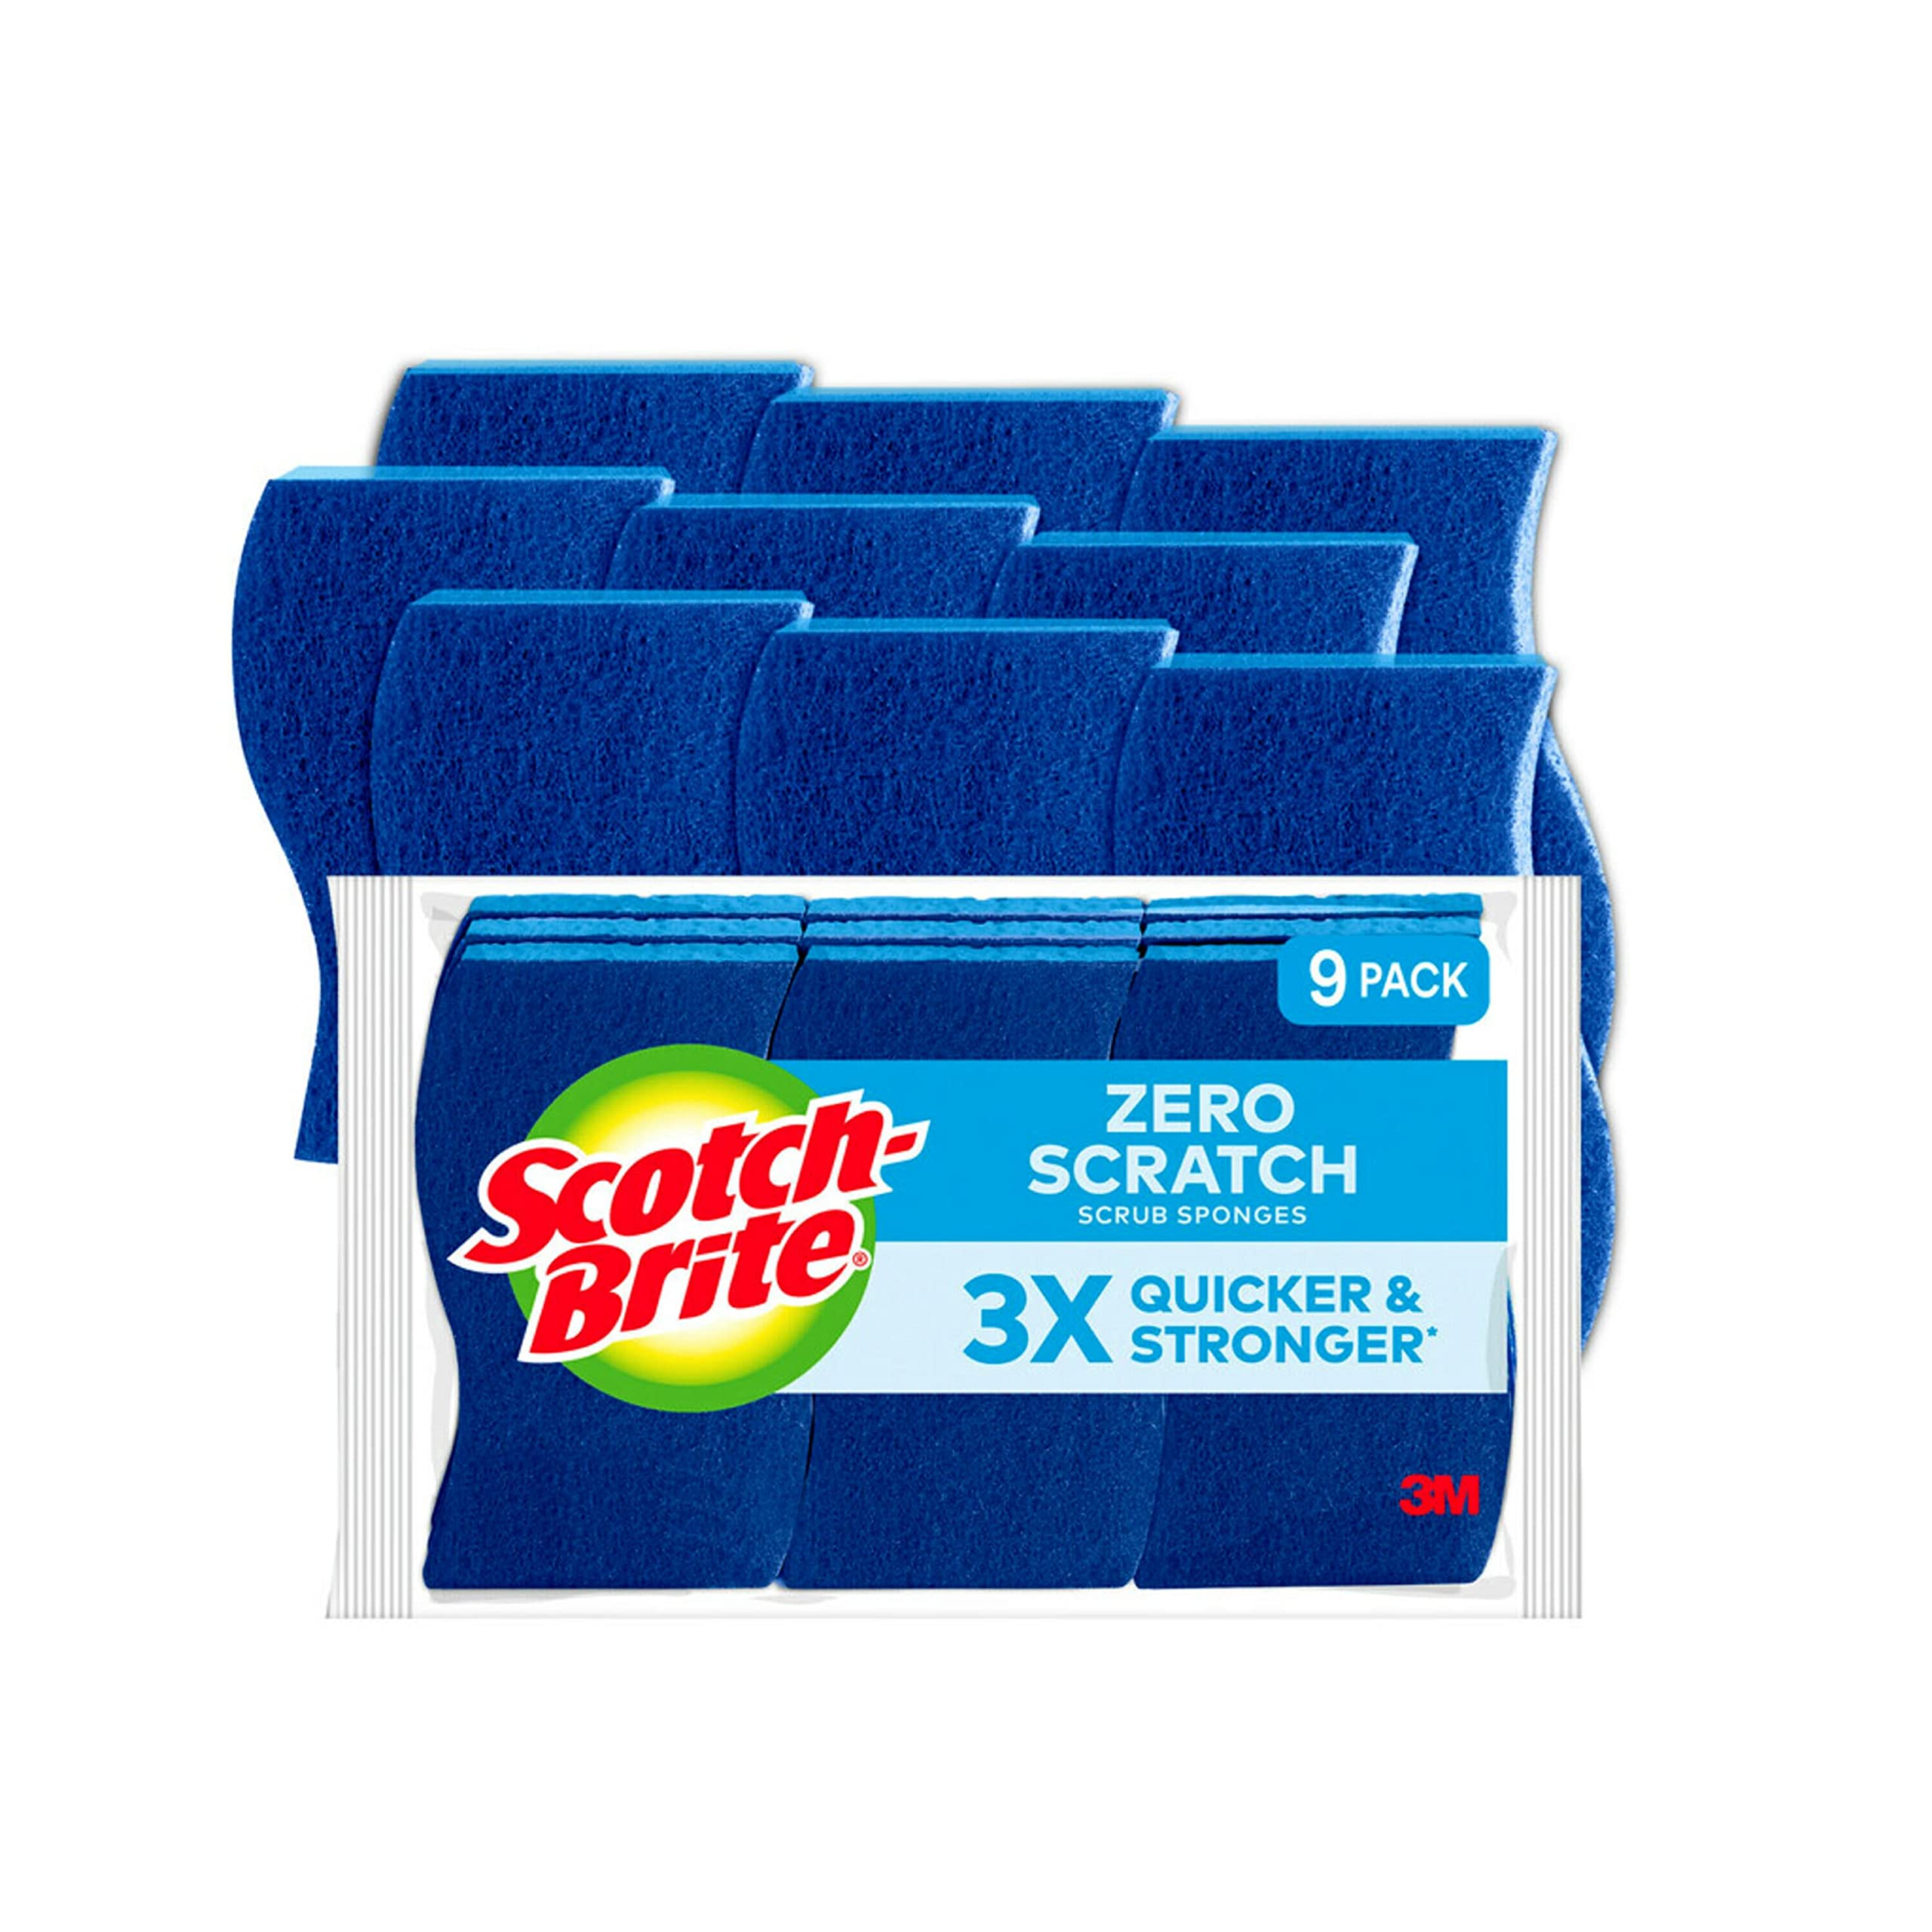 Book Cover Scotch-Brite Zero Scratch Non-Scratch Scrub Sponges, Sponges for Cleaning Kitchen, Bathroom, and Household, non-scratch Sponges Safe for Non-Stick Cookware, 9 Scrubbing Sponges